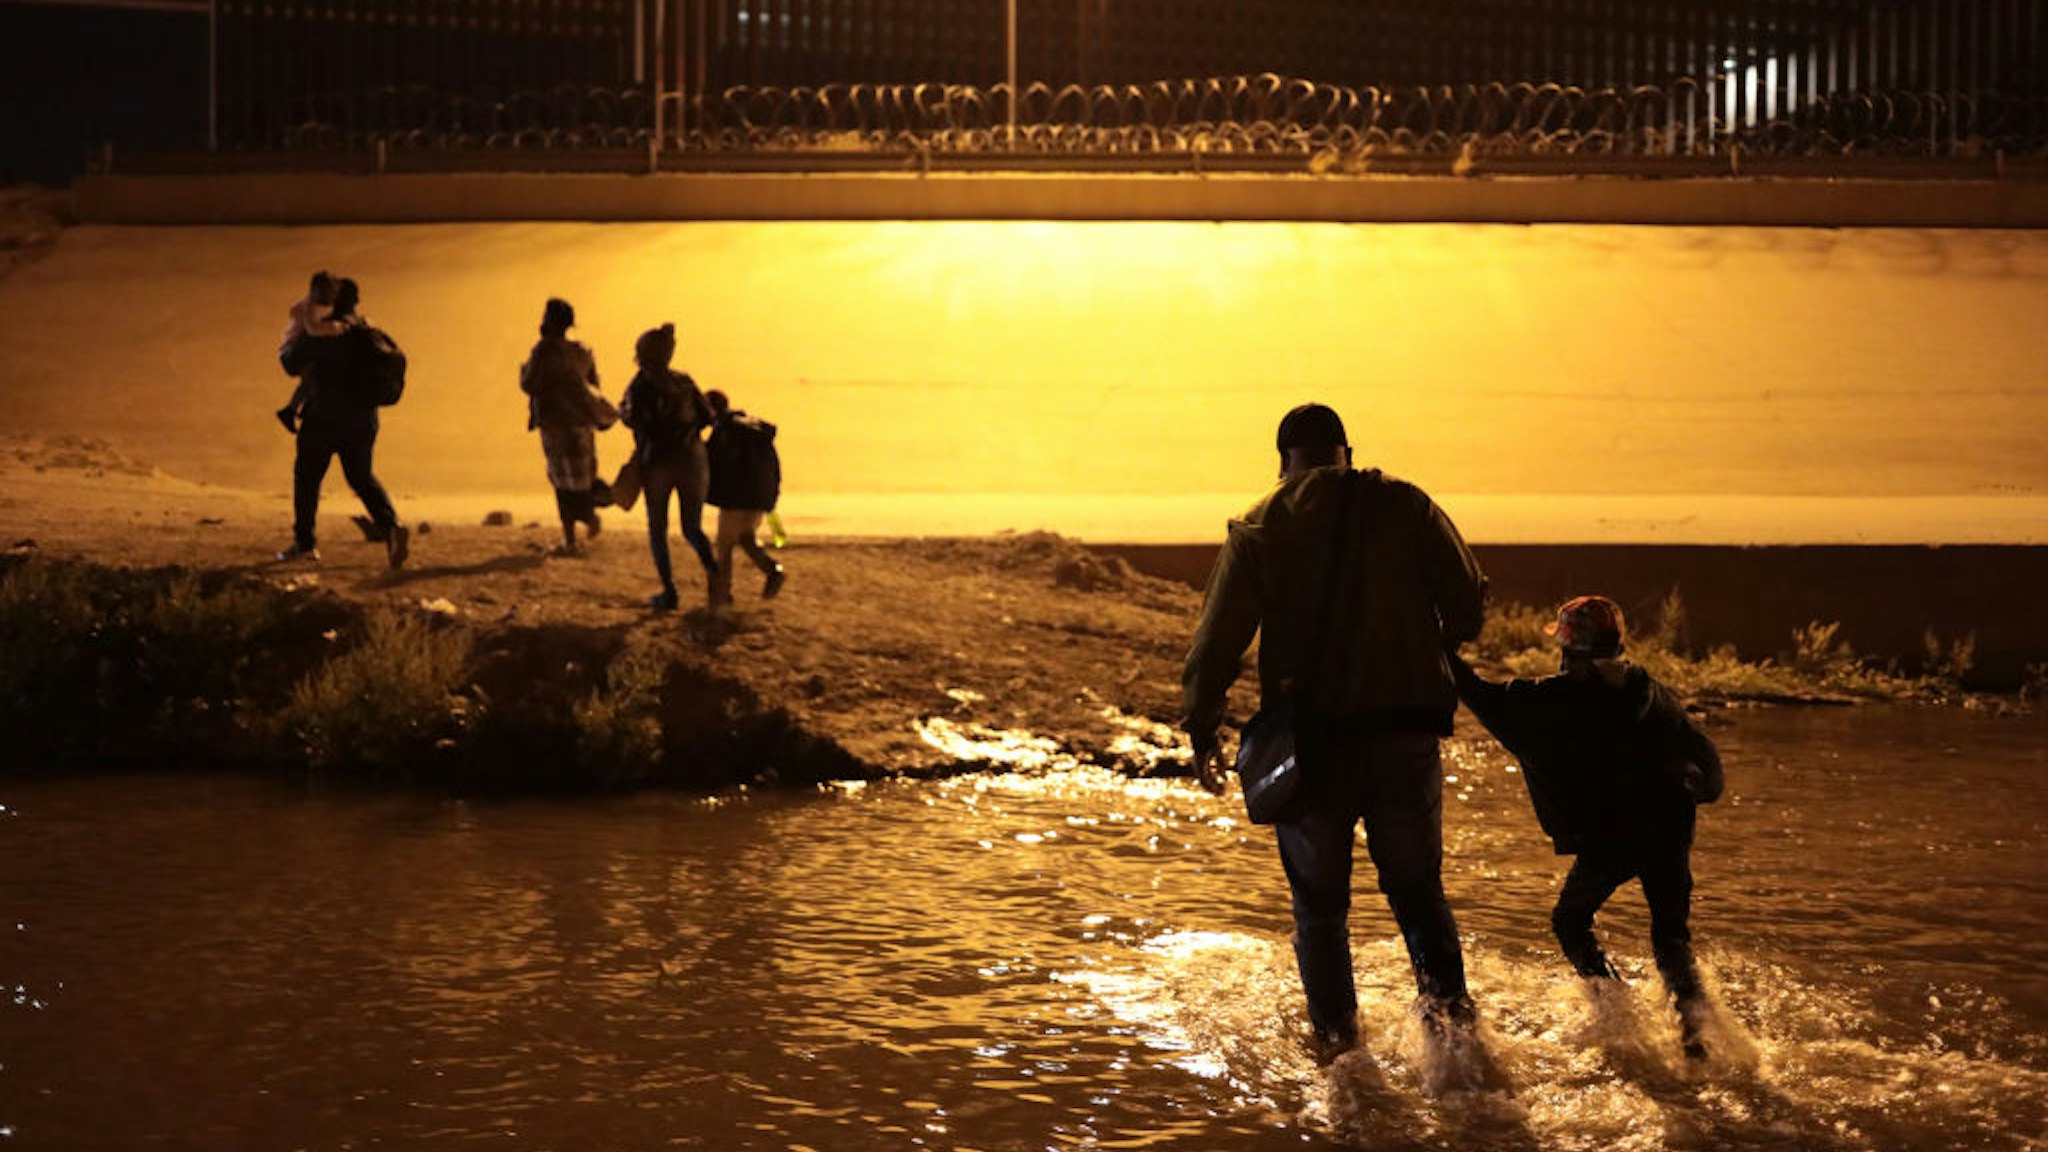 A family from Haiti crosses the Rio Grande, Juarez, Mexico, on March 30, 2021 to surrender to the border patrol to request political asylum in the United States, during the last month an increase in Haitian families has been seen crossing the border city Juarez El Paso Texas (Photo by David Peinado/NurPhoto via Getty Images)